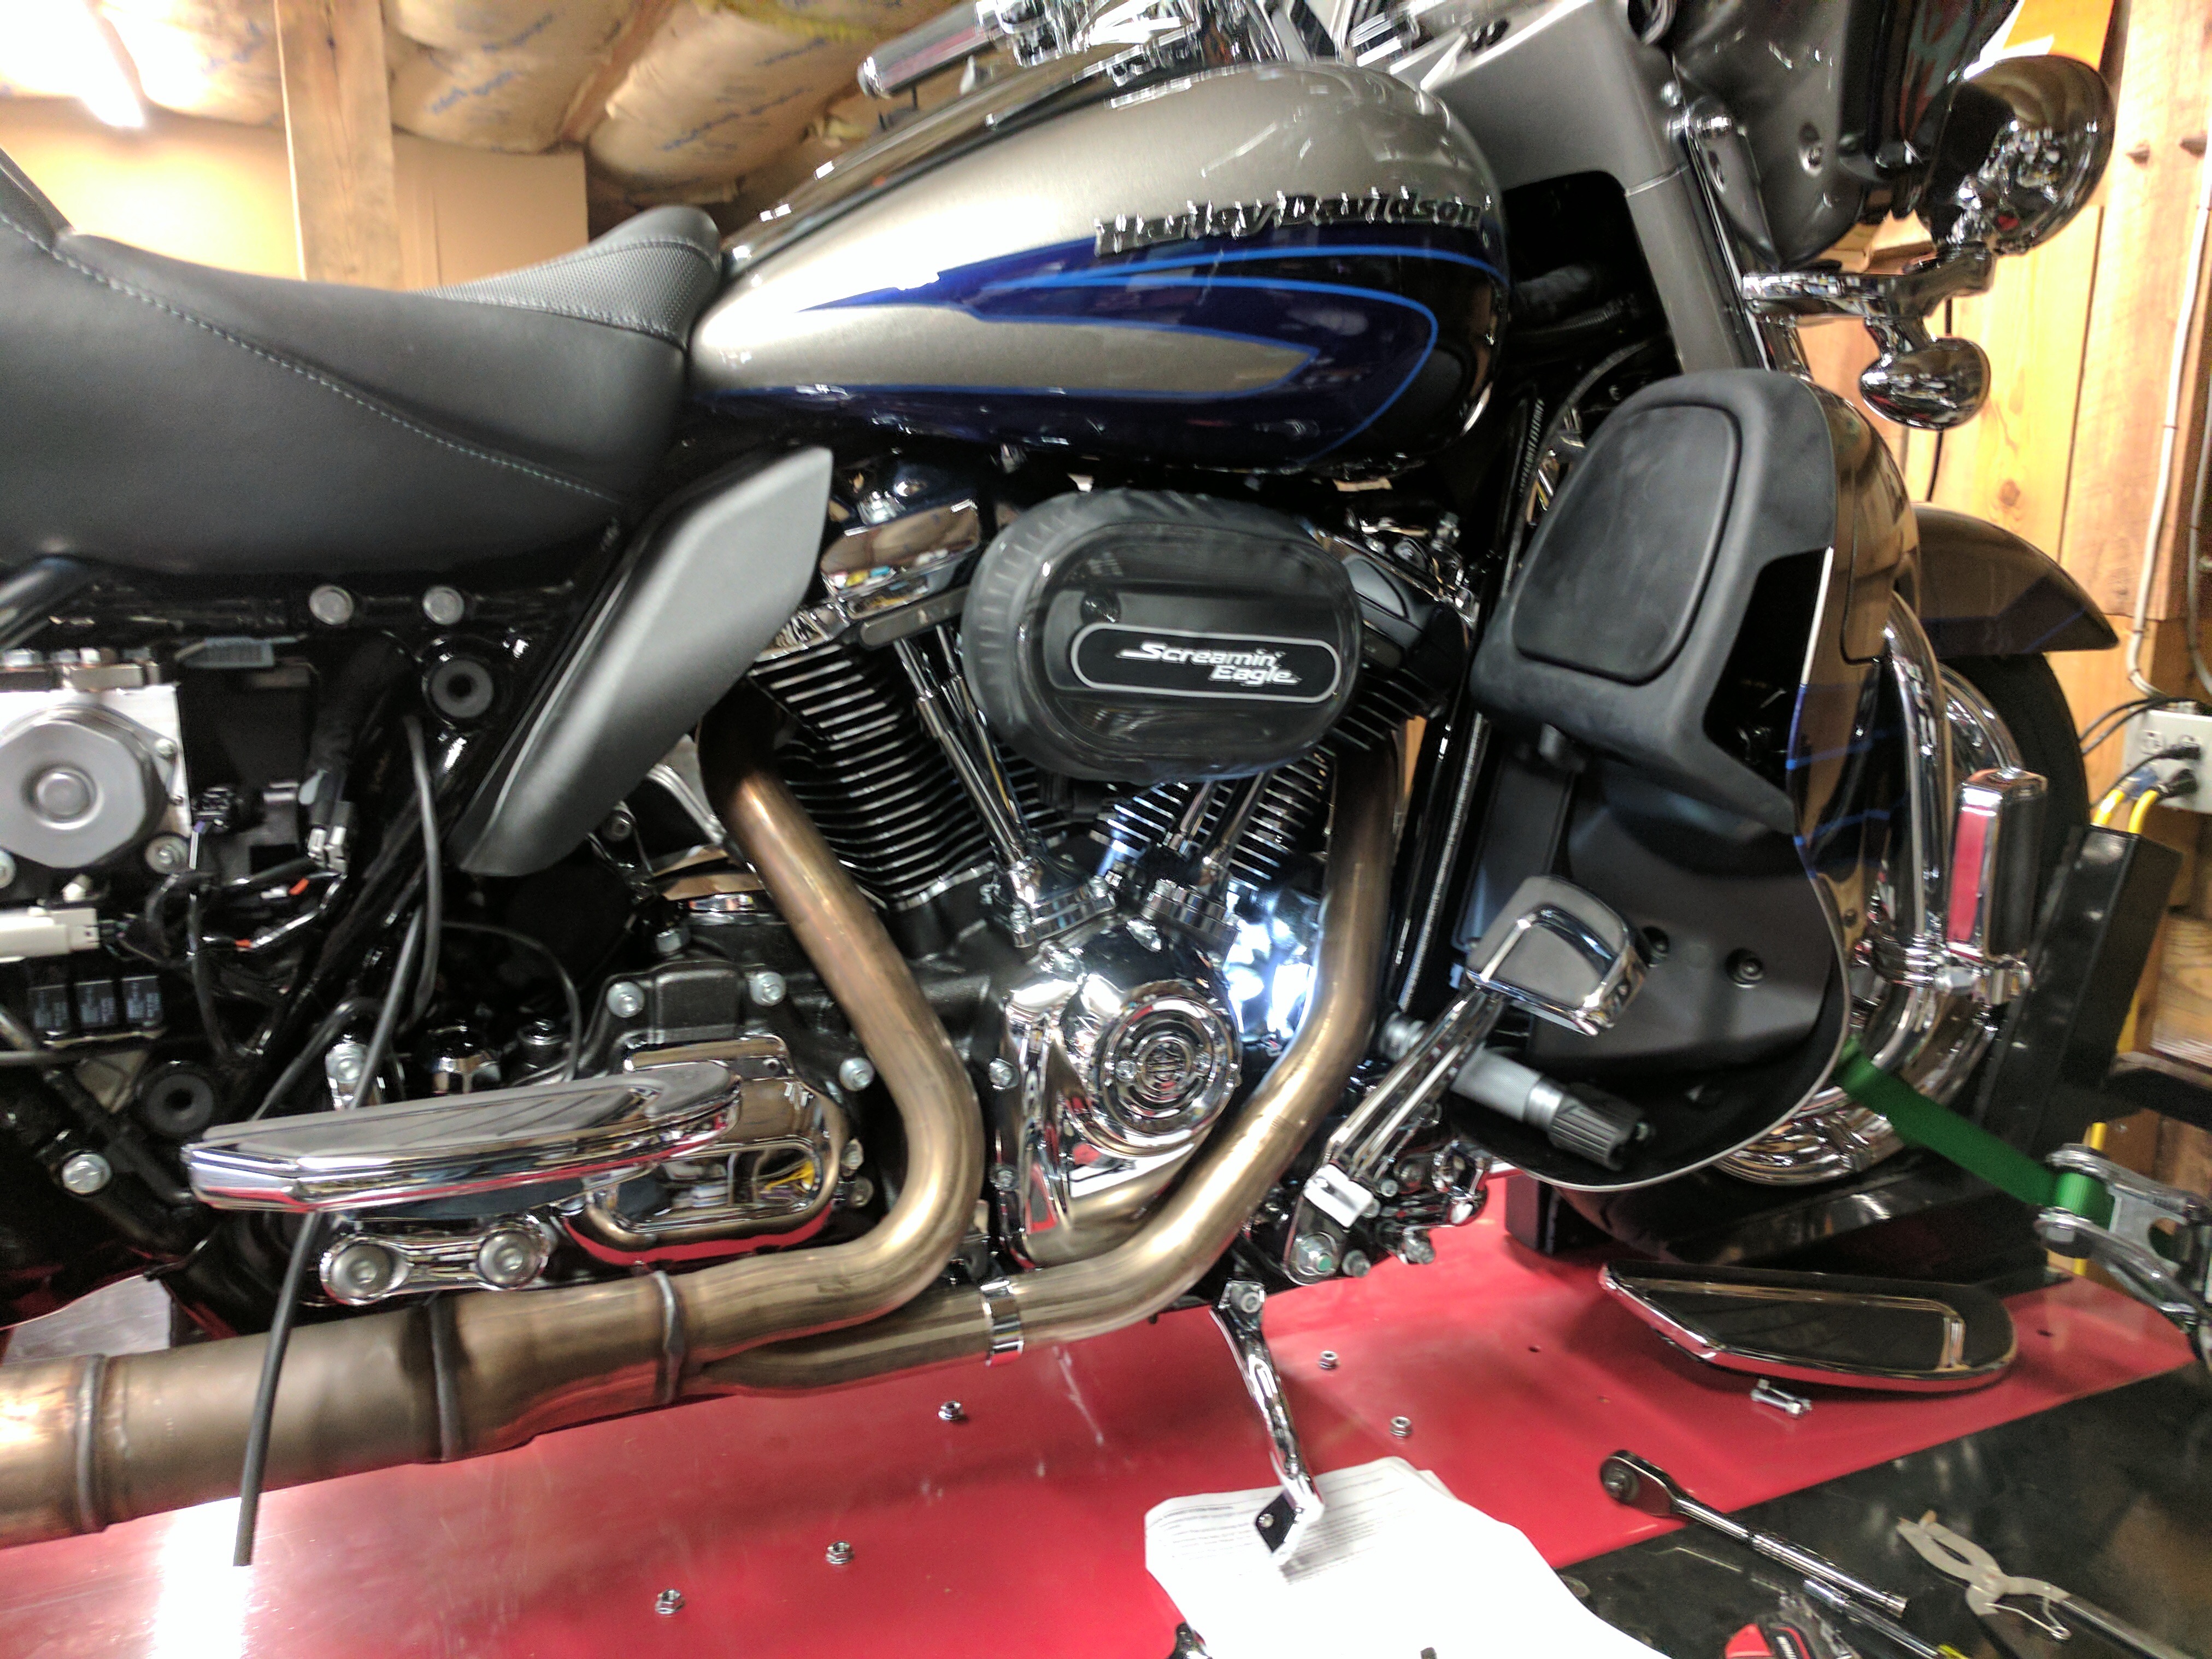 Best exhaust for 2017 Street Glide with 107 Miluakee - Harley Davidson